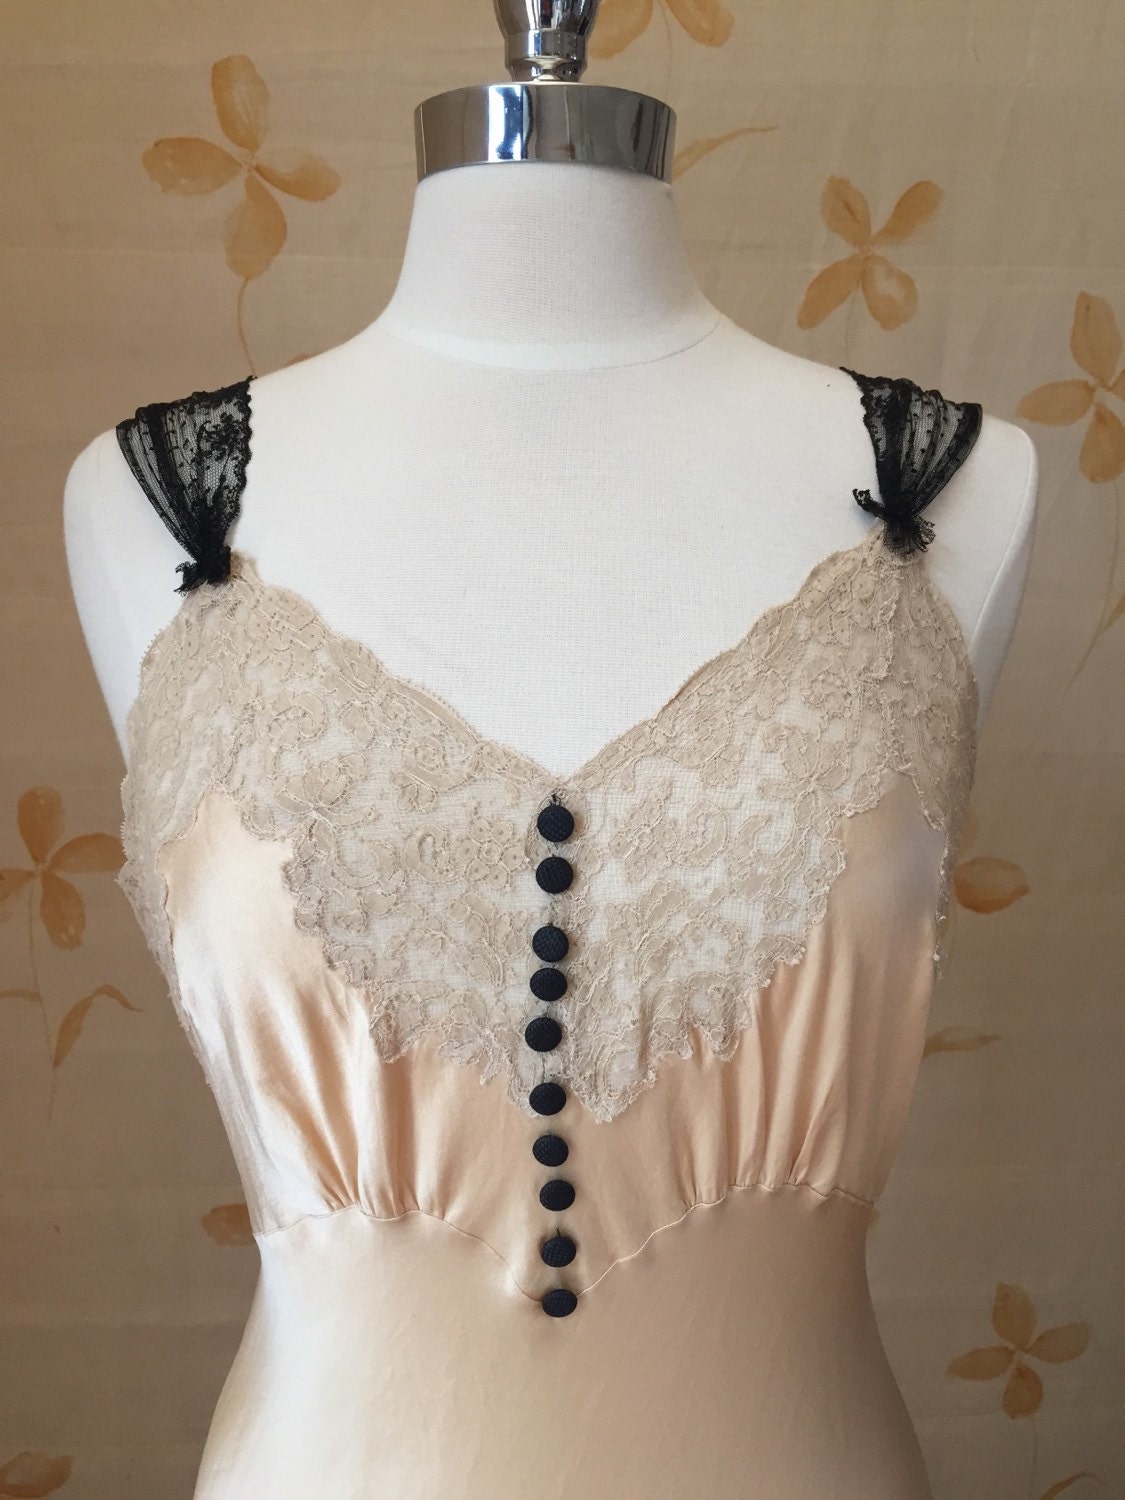 1920s Gatsby era vintage silk slip gown with chantilly and